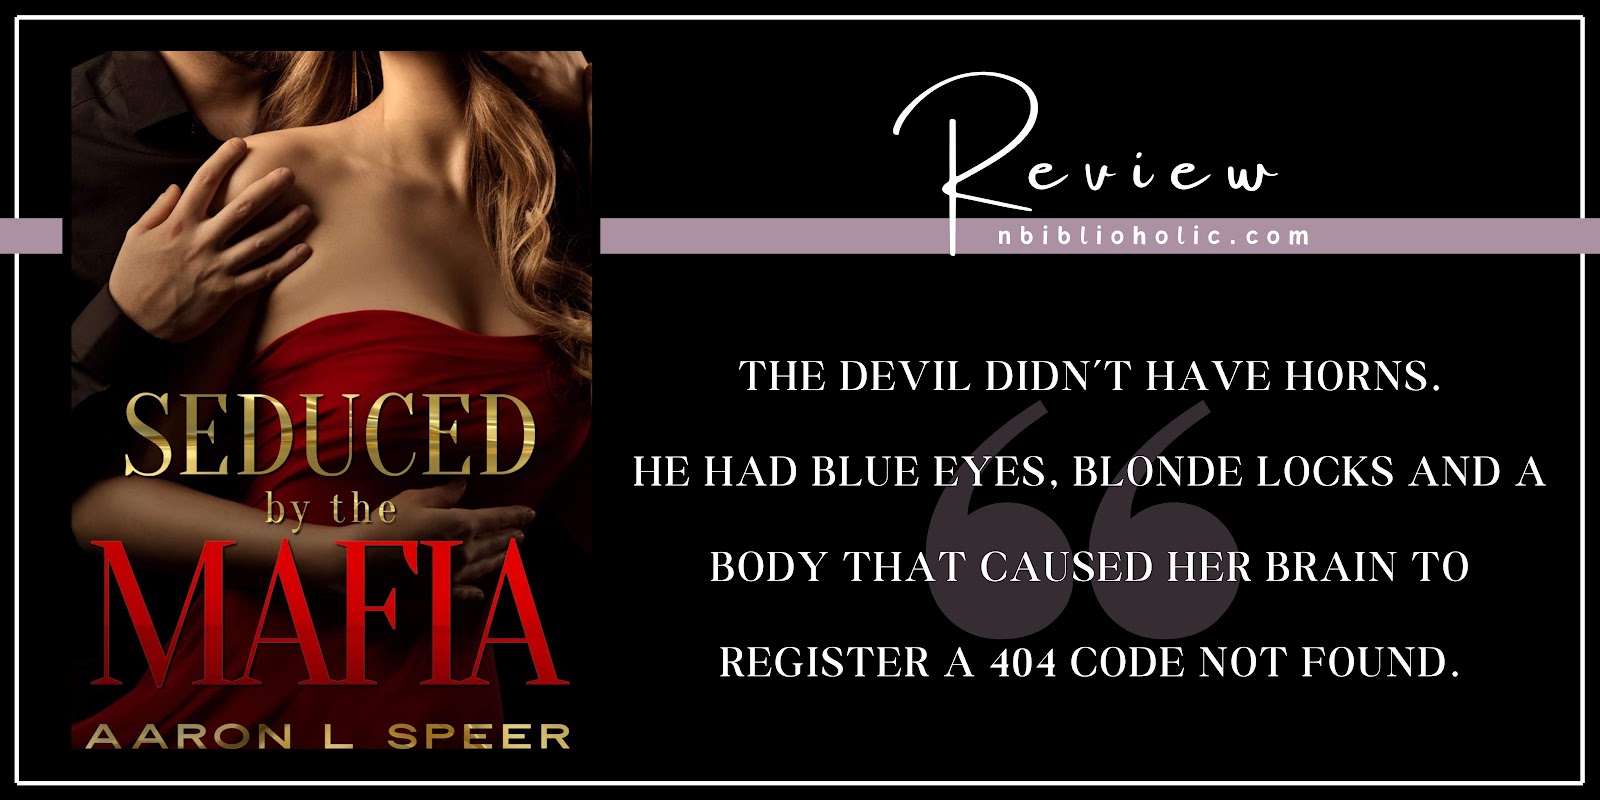 Seduced by the Mafia by Aaron L. Speer